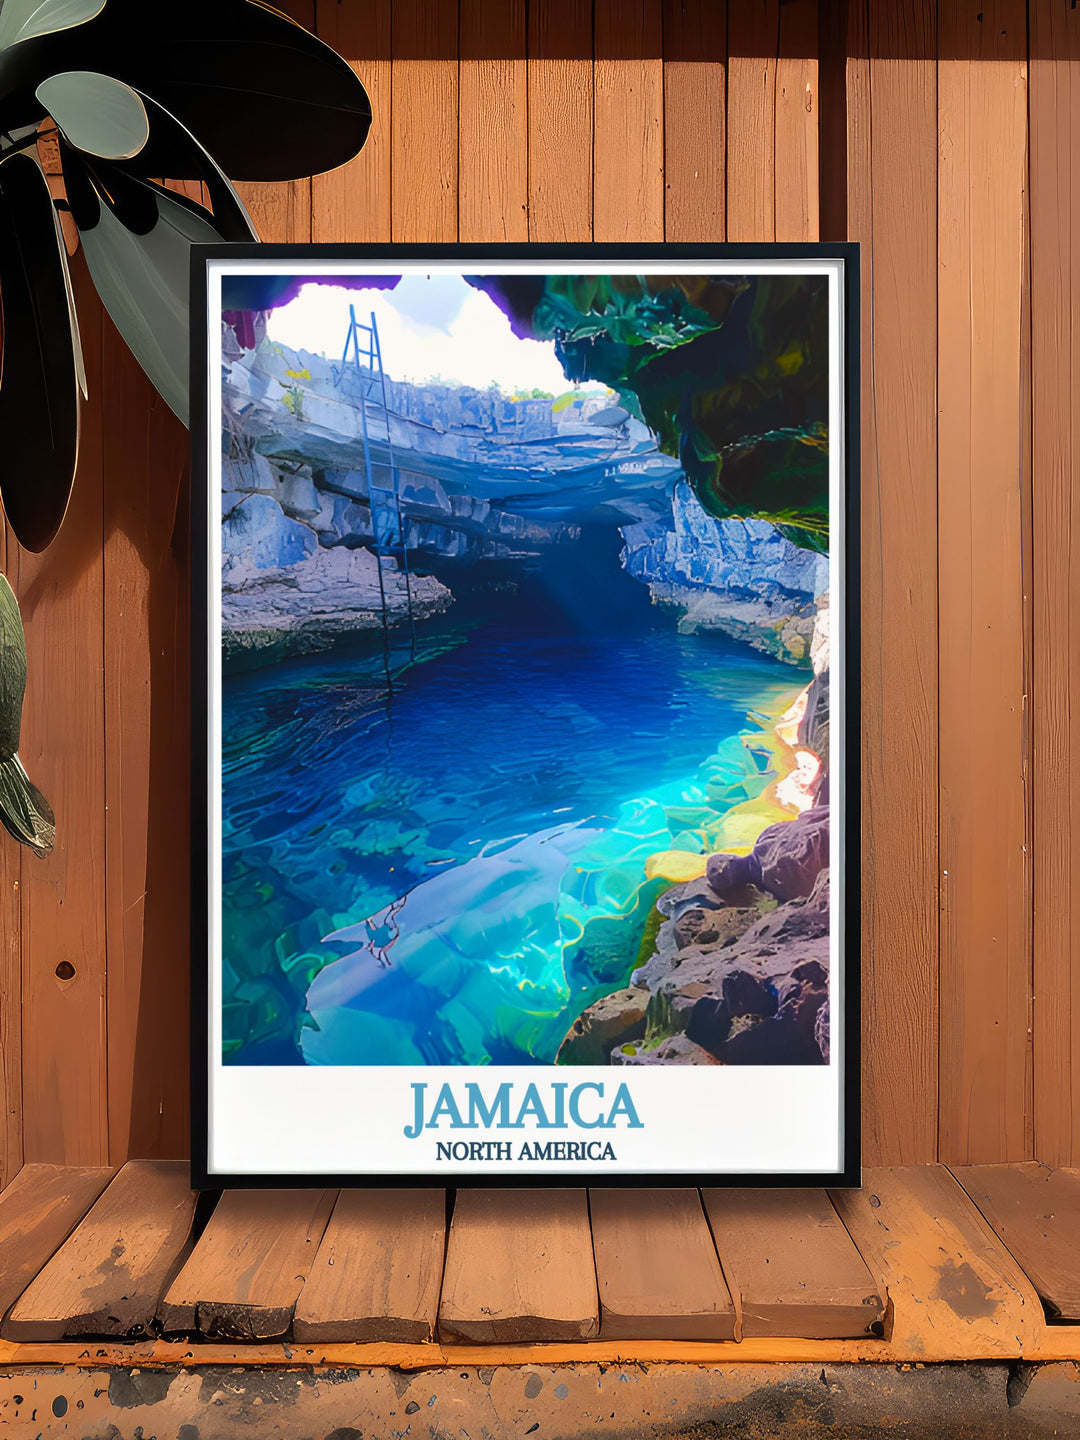 Featuring the tranquil Blue Hole Mineral Spring, this art print brings the refreshing and mineral rich waters of Jamaica into your living space.